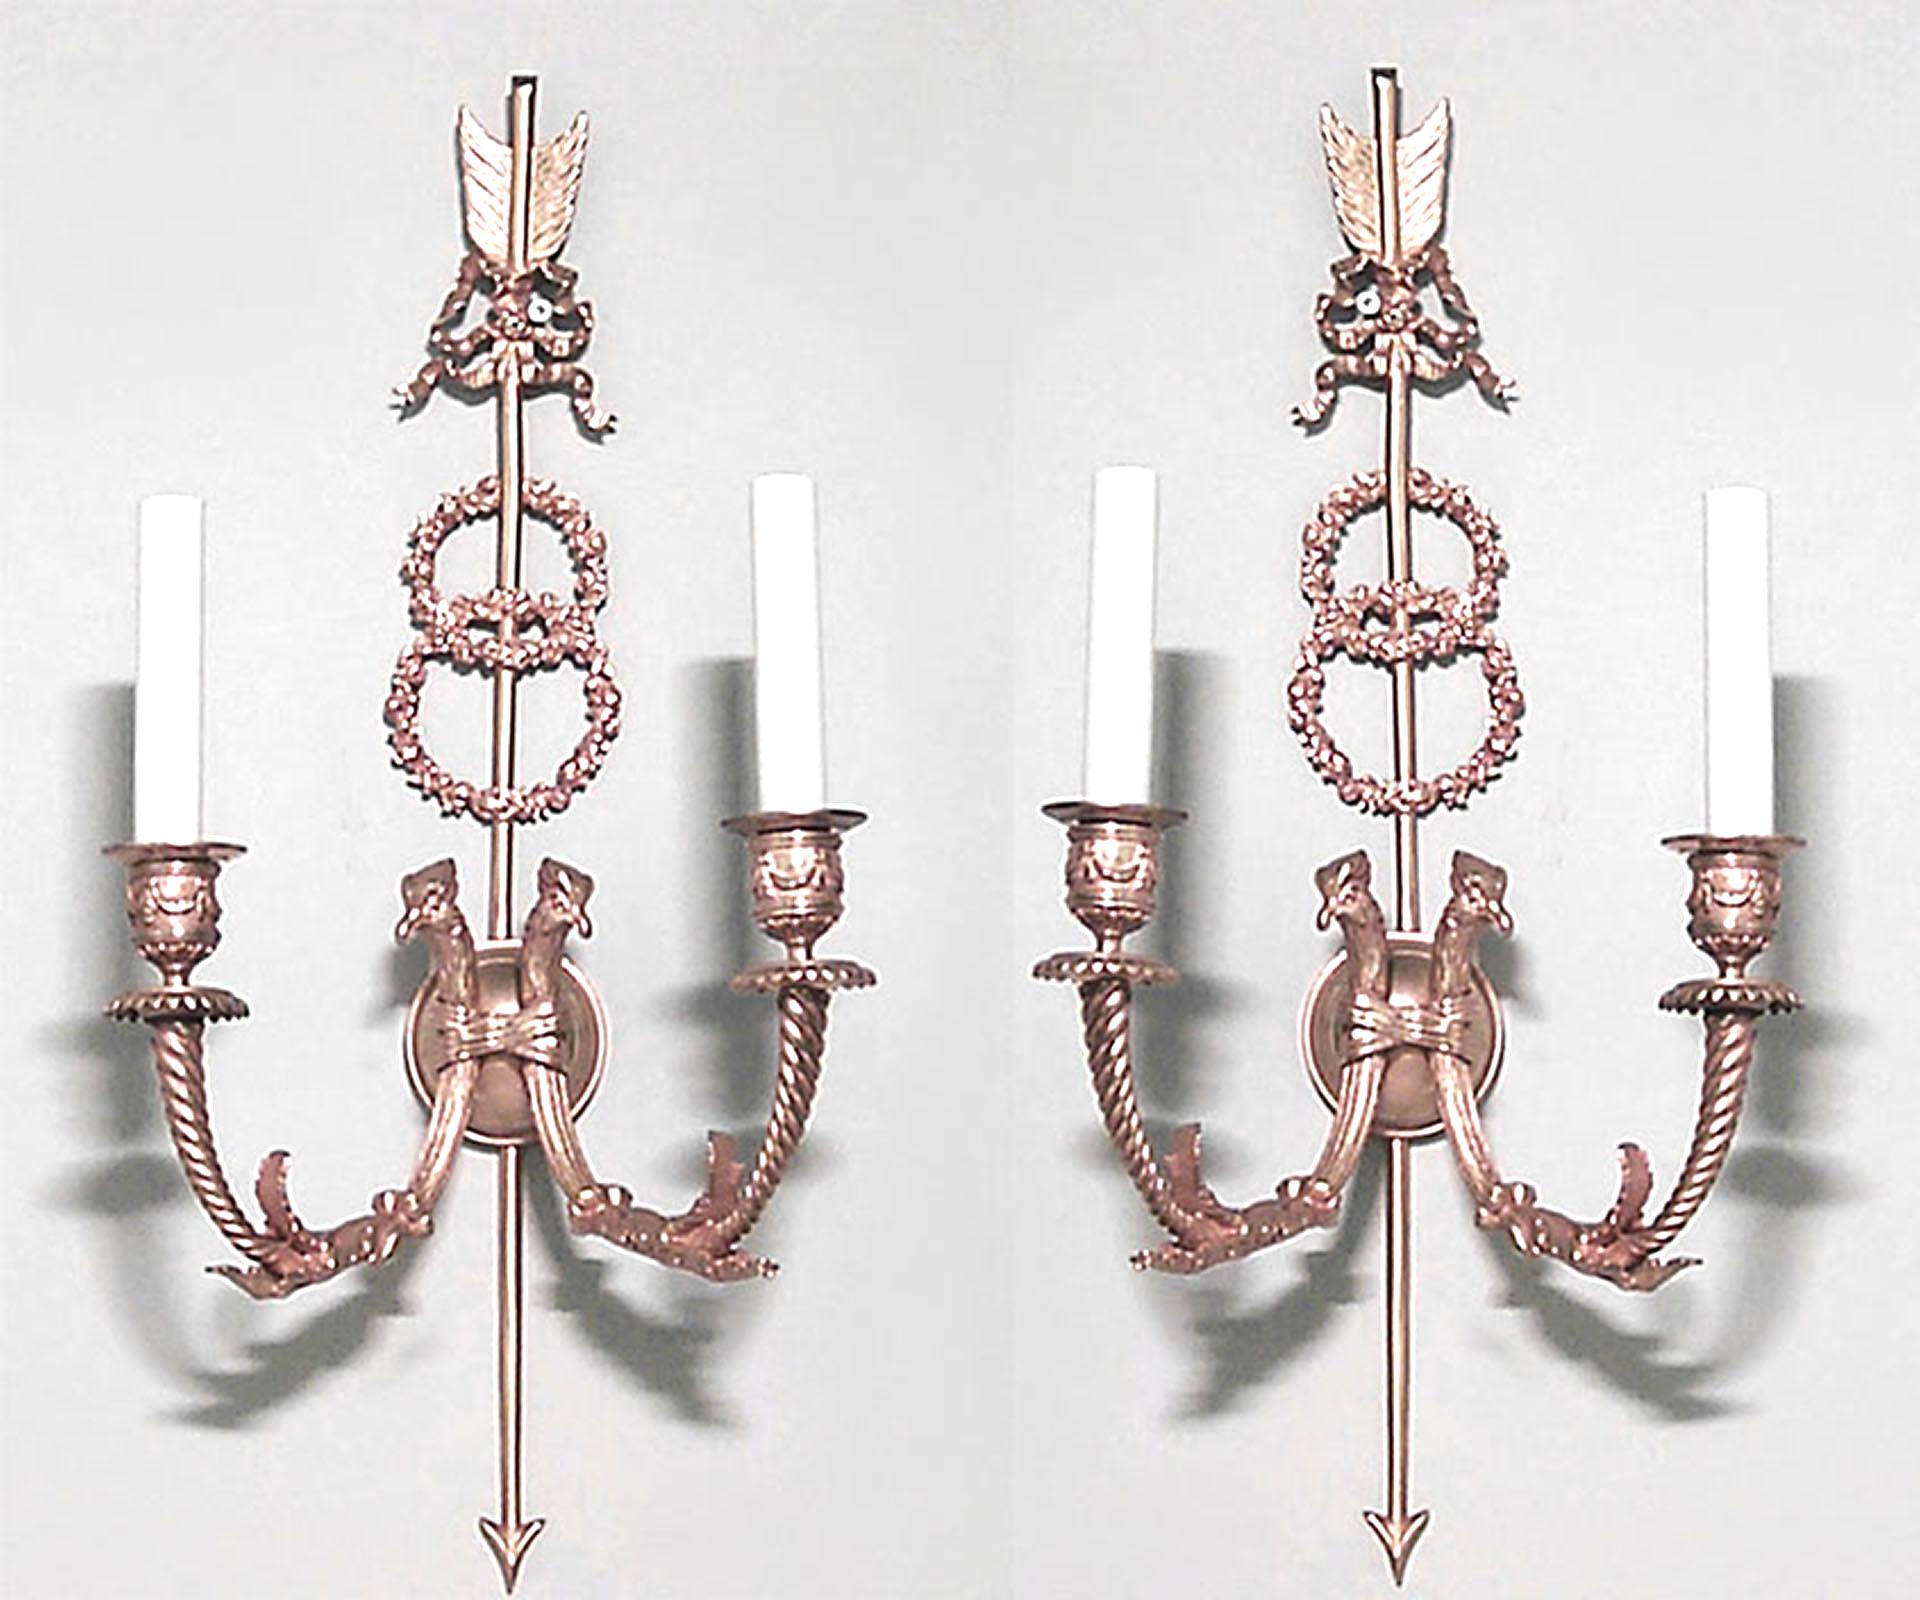 Pair of French Directoire-style (19th Century) bronze dore wall scoces with two arms, a double wreath design, and bird head and arrow details. (PRICED AS Pair).
 